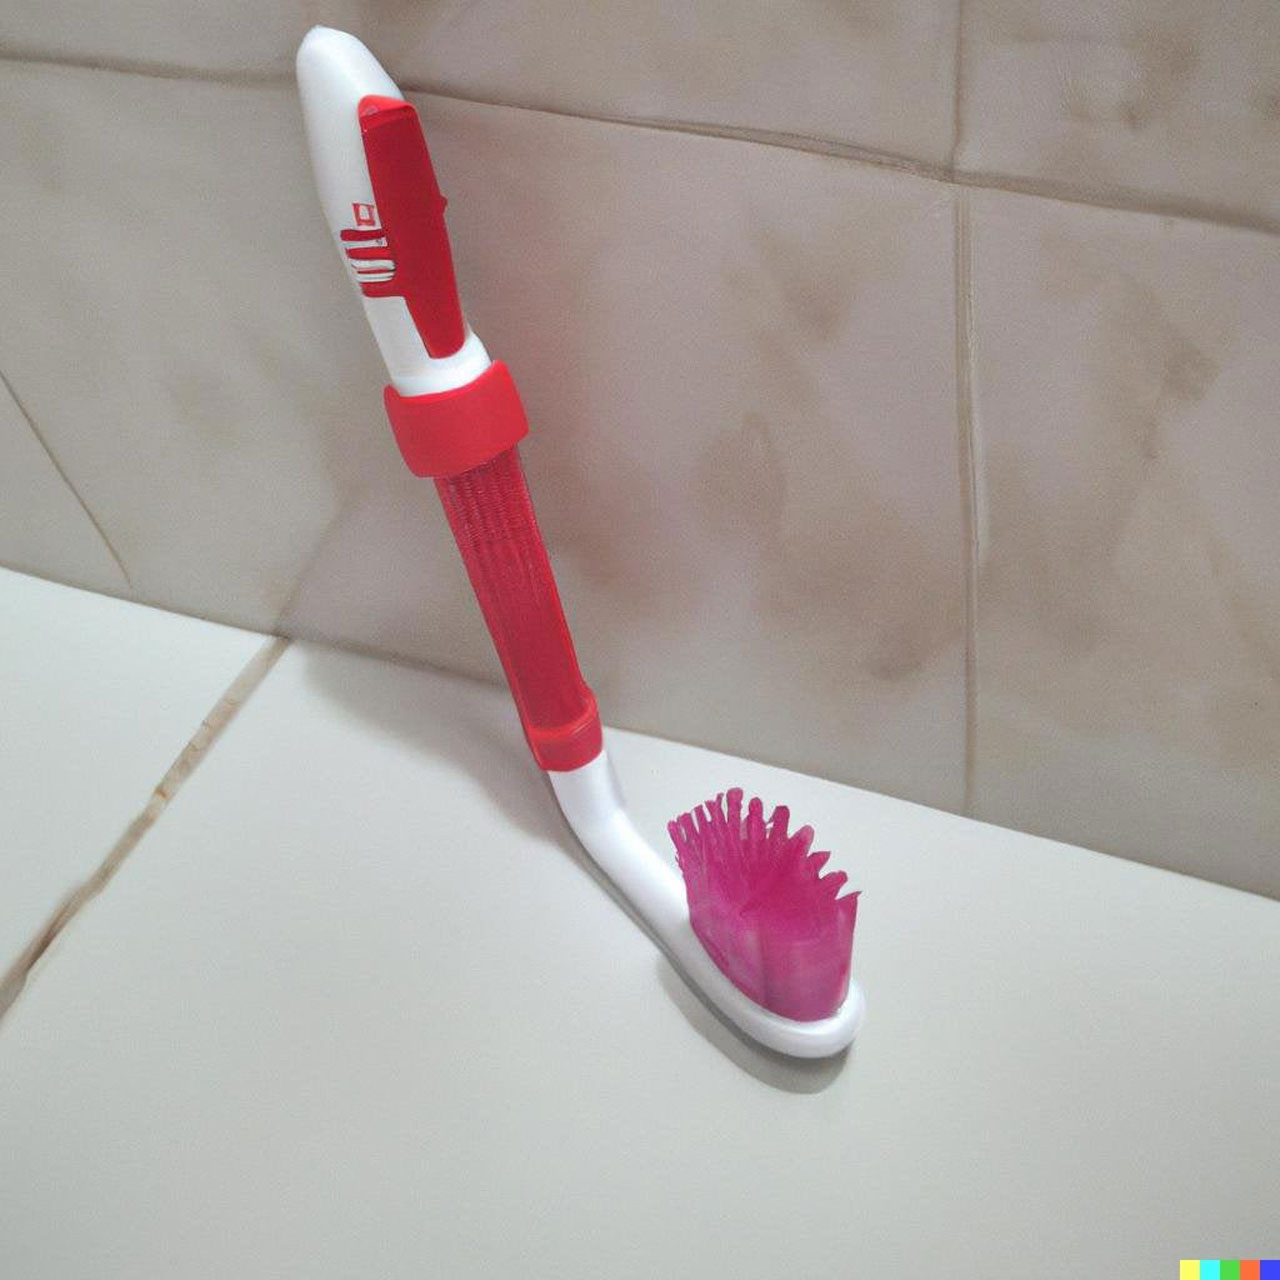 Combination of toilet brush and toothbrush